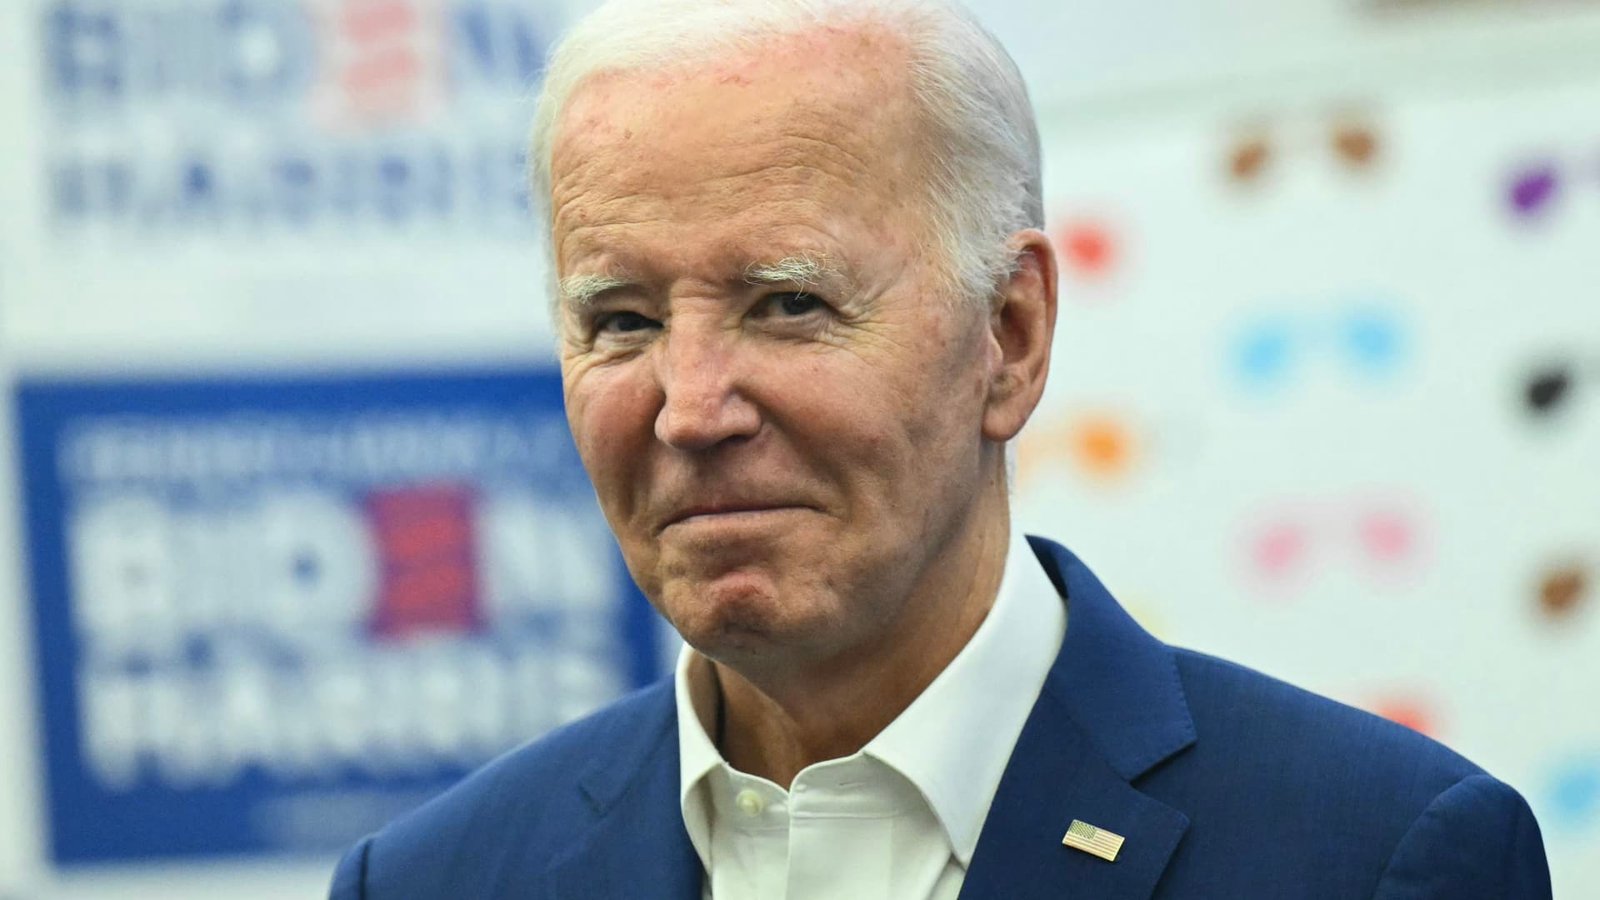 Chance of Biden dropping out of presidental race is 40%, Stifel says